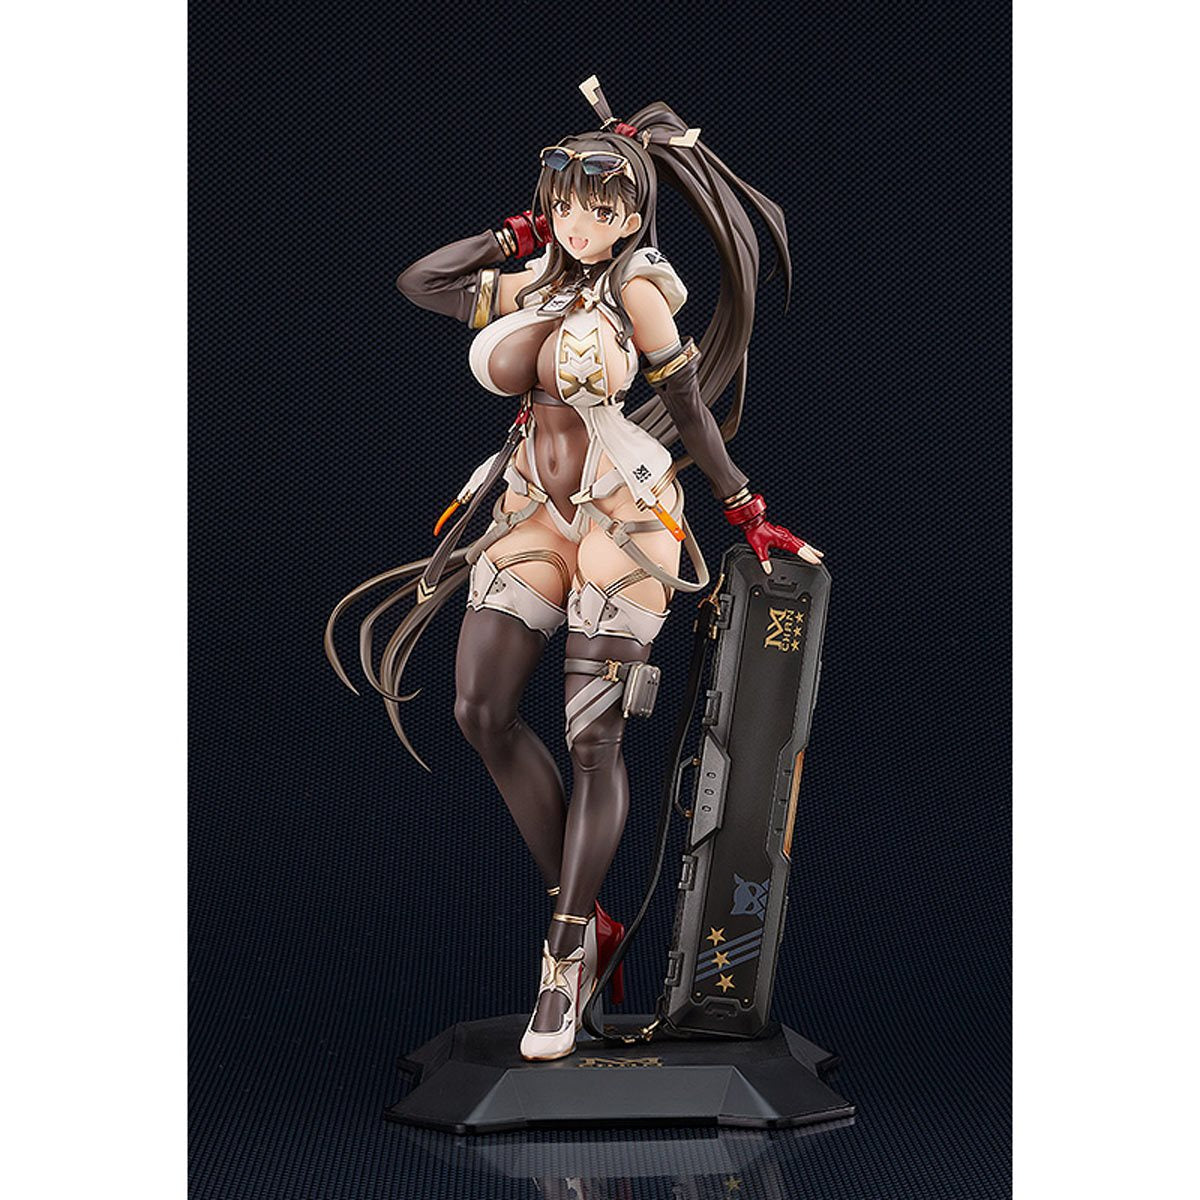 MX-chan 1/7th Scale Figure Max Factory